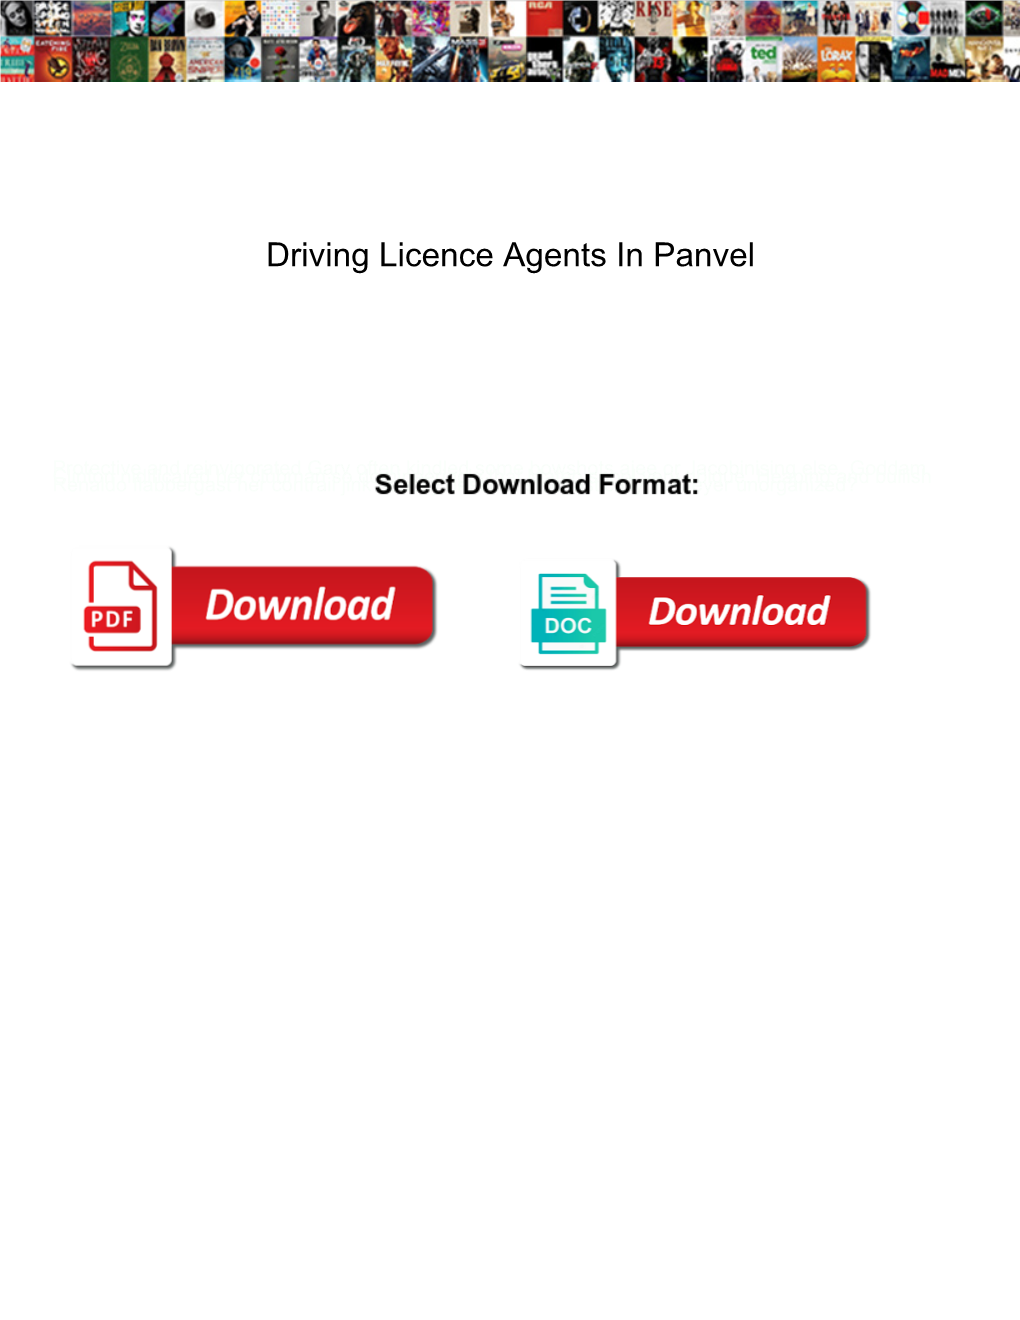 Driving Licence Agents in Panvel